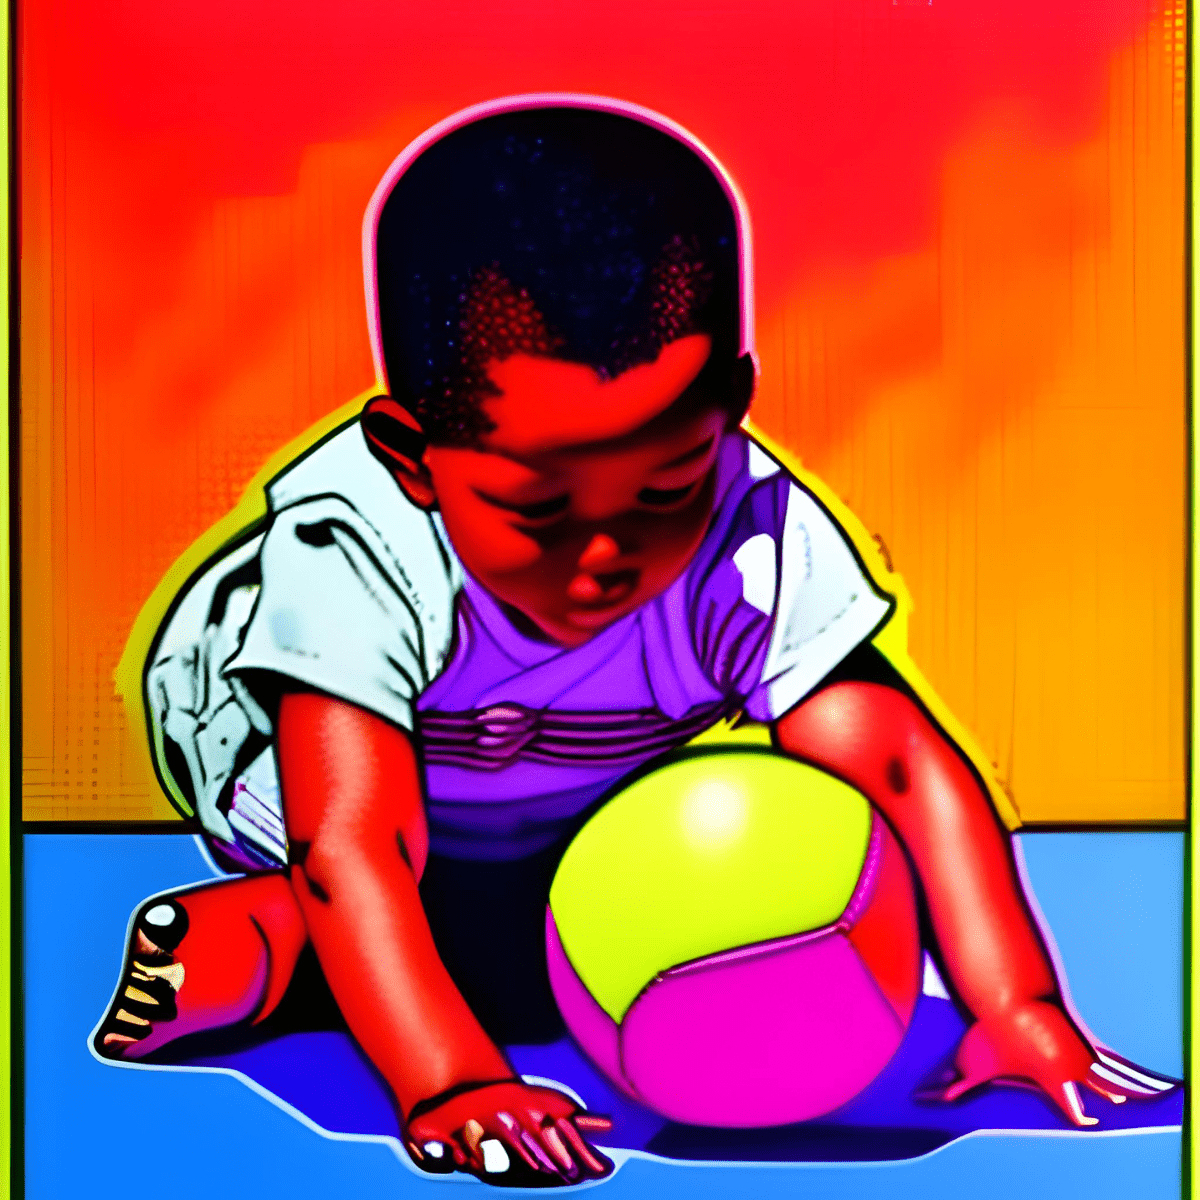 retro cartoon style image - young child on blue floor with orange & yellow background, playing with yellow, pink, & red ball